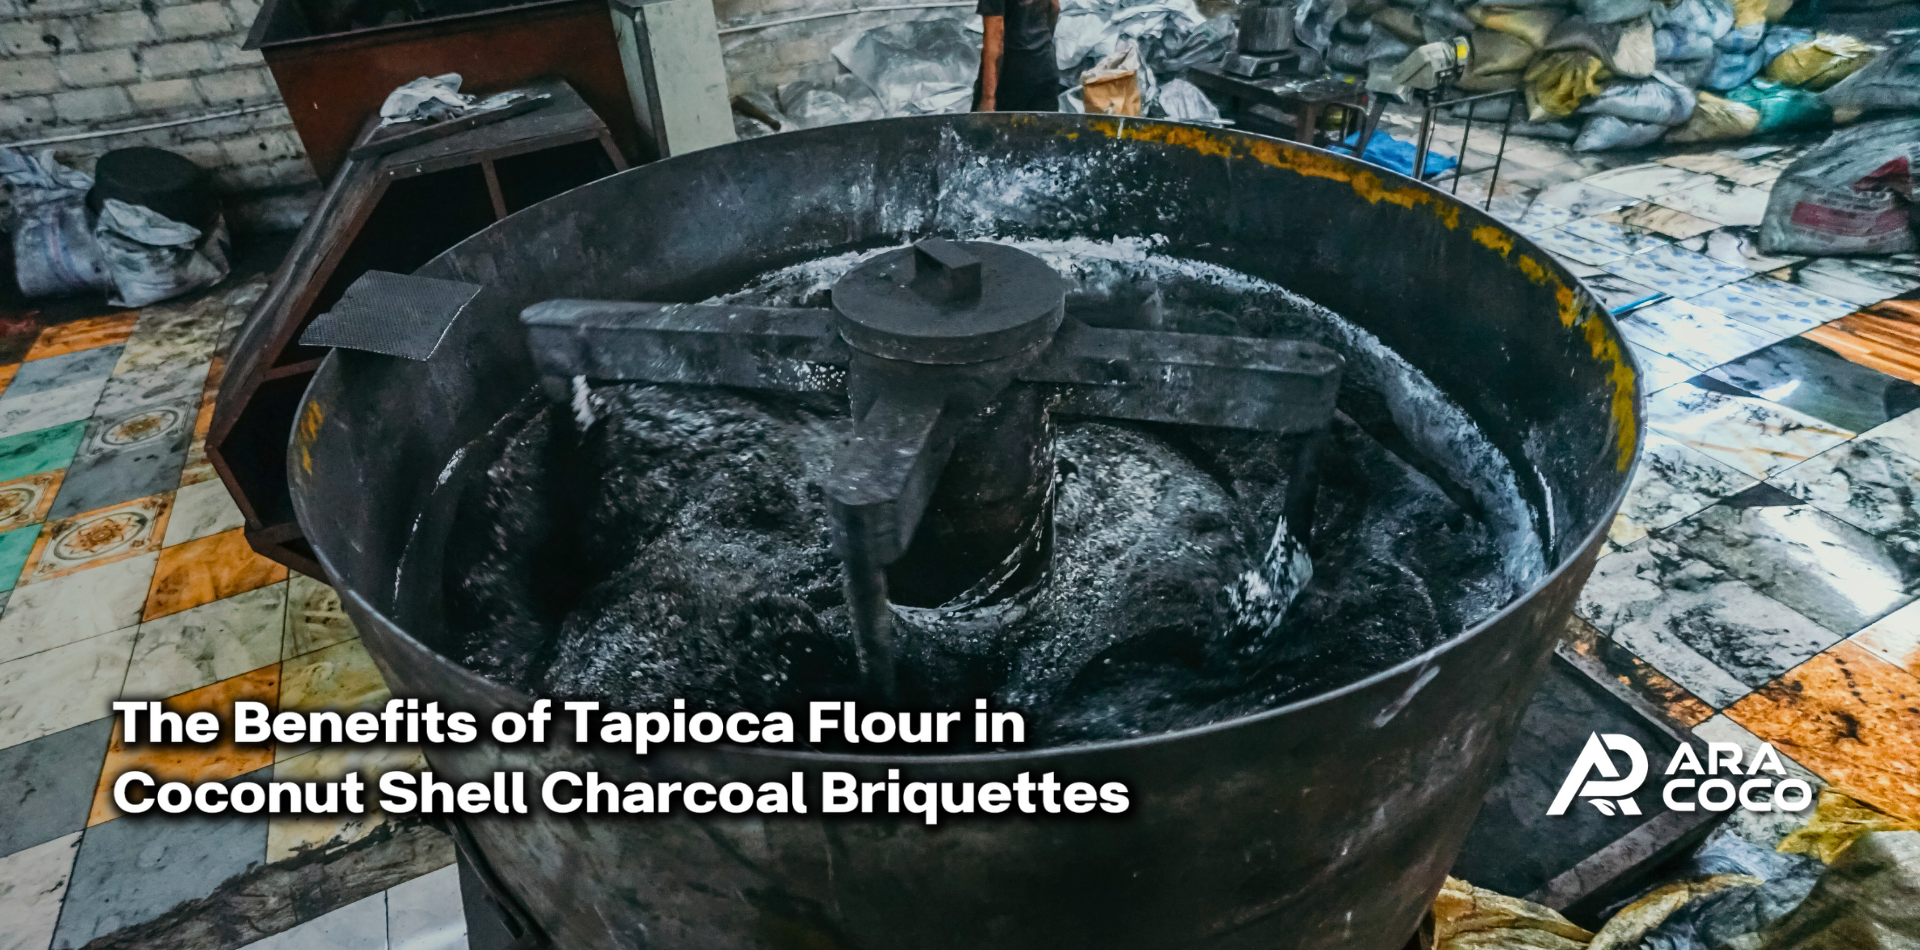 The Benefits of Tapioca Flour in Coconut Shell Charcoal Briquettes